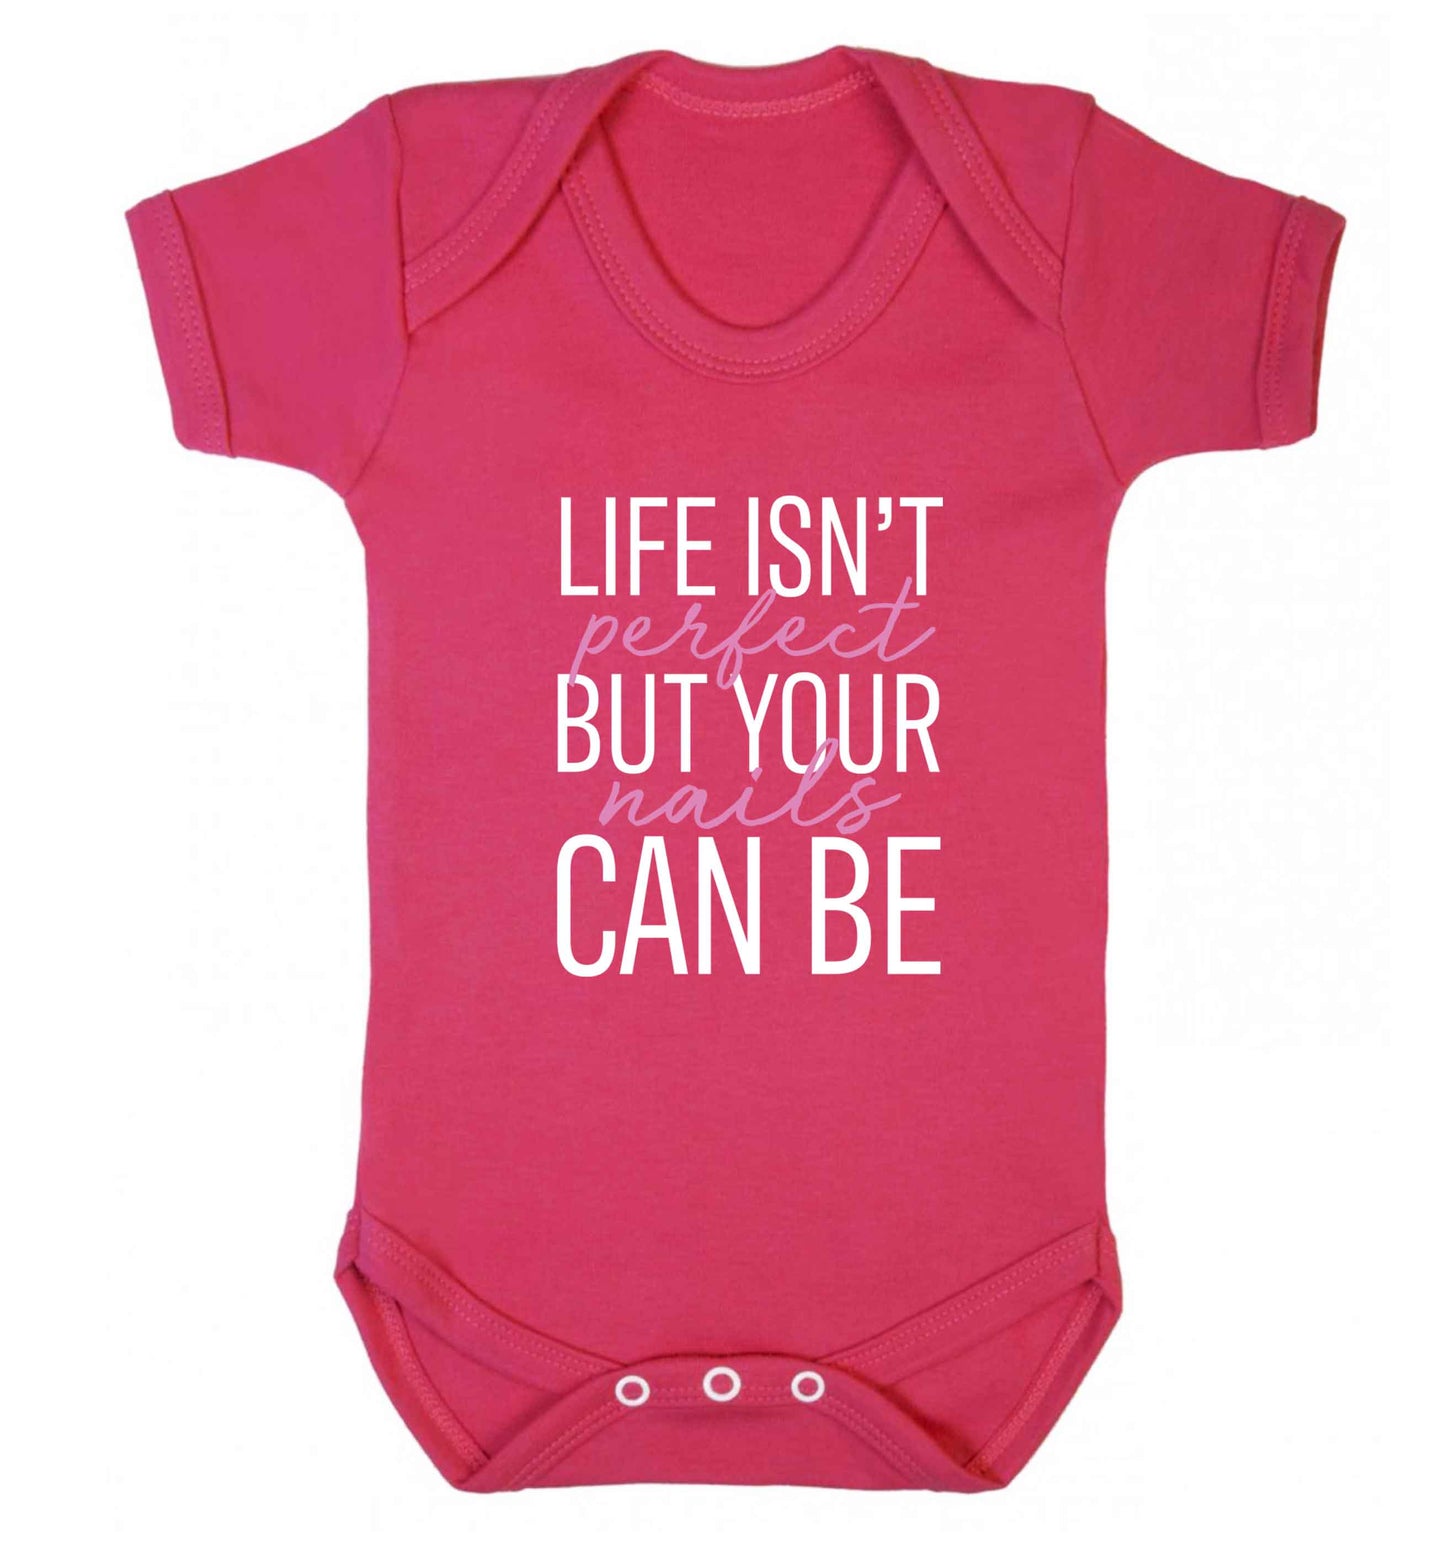 Life isn't perfect but your nails can be baby vest dark pink 18-24 months